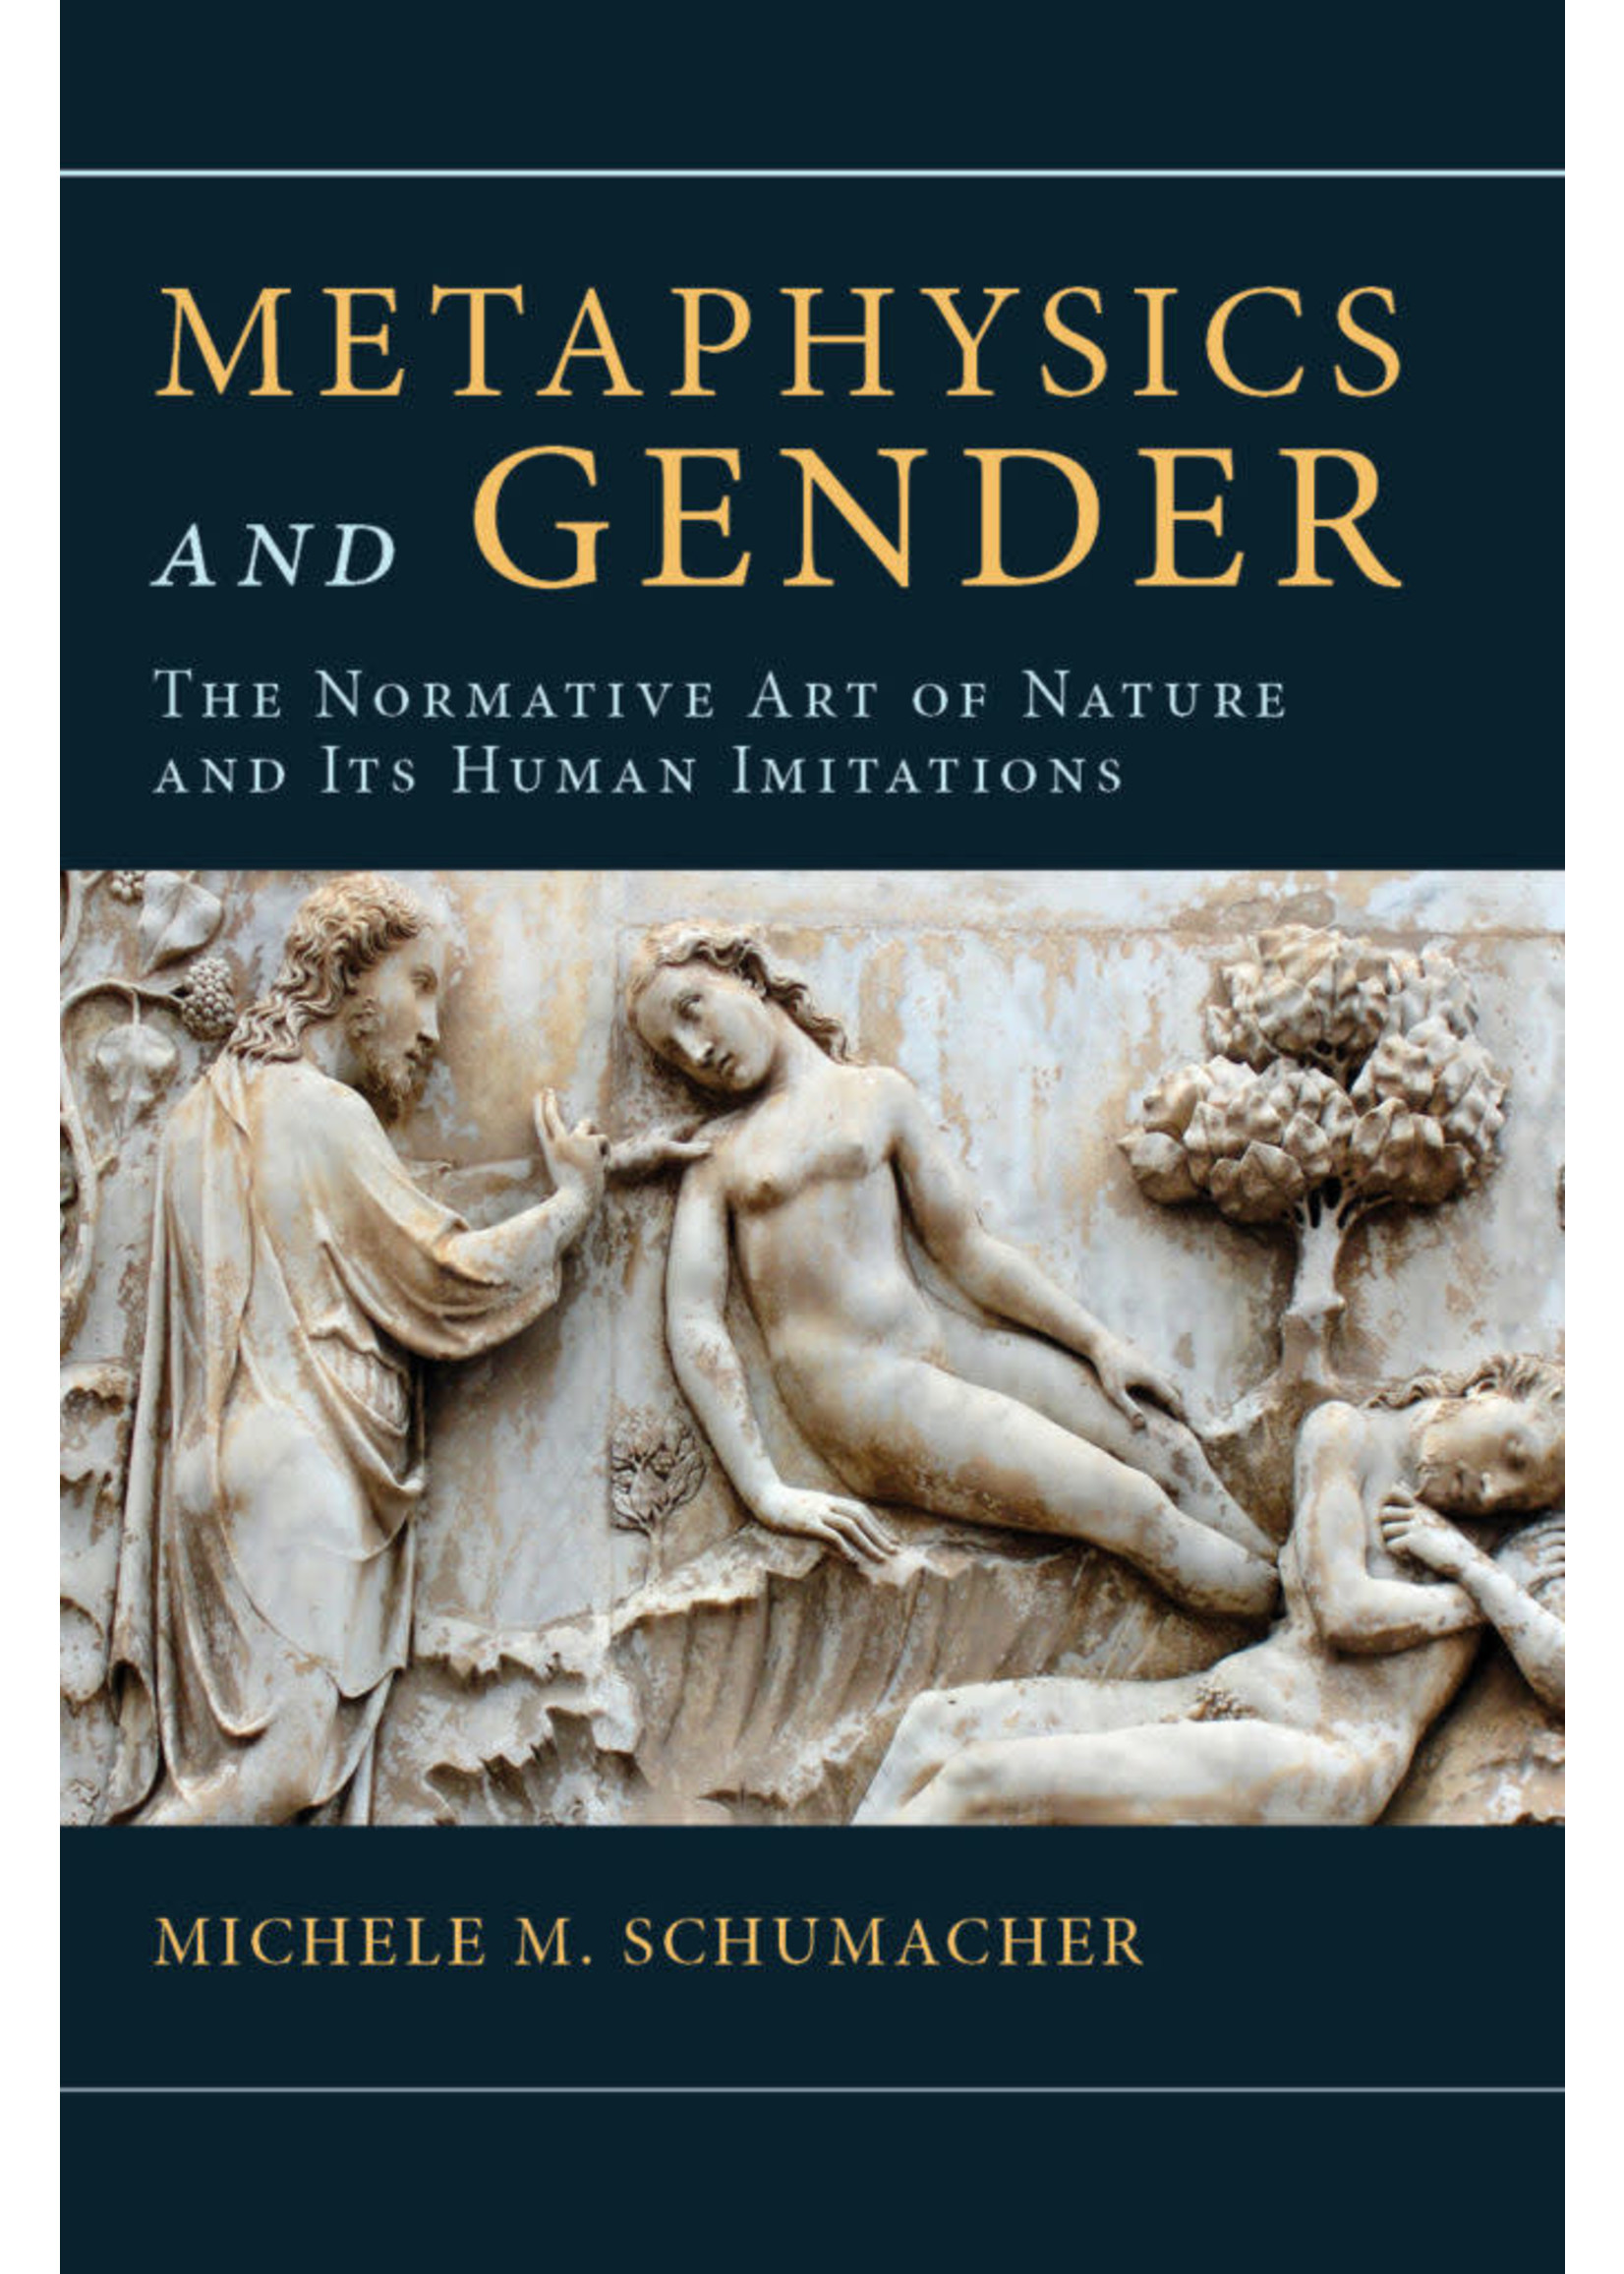 Metaphysics and Gender: The Normative Art of Nature and Its Human Imitations